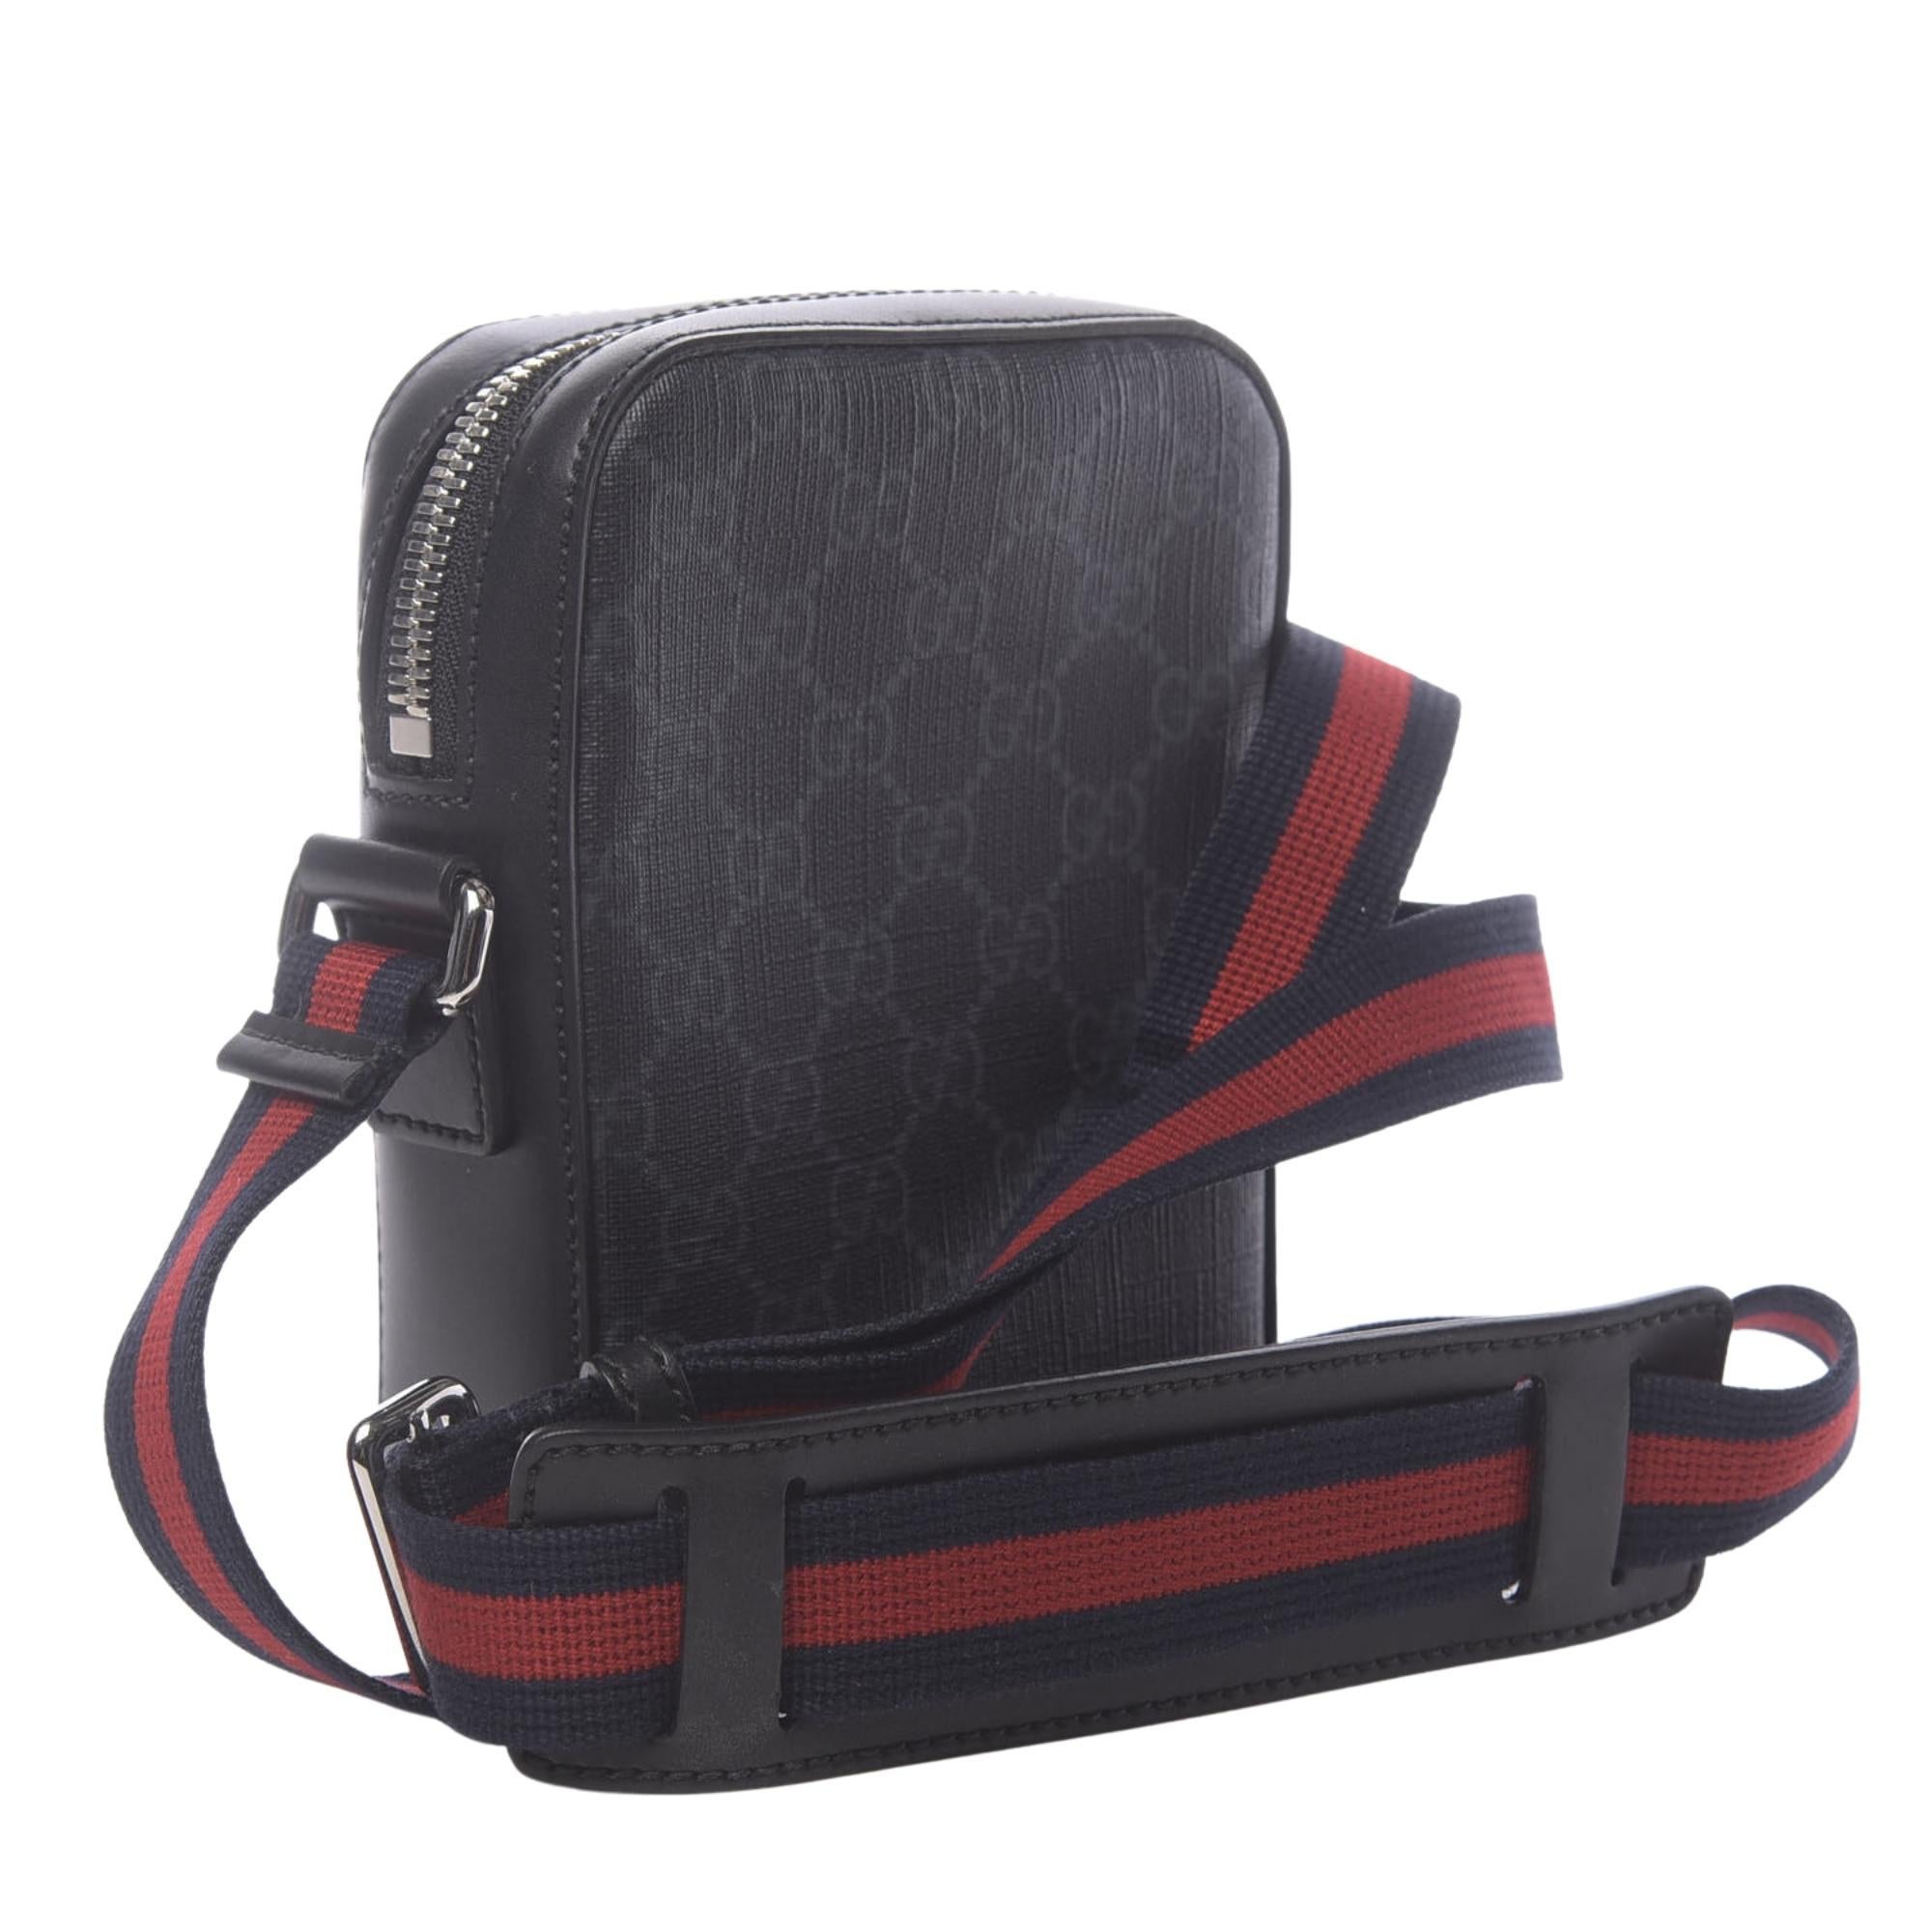 This contemporary looking messenger bag is made of black Gucci GG monogram coated canvas. The bag features a black/grey GG Supreme canvas, black leather trim, blue and red Web strap, palladium-toned hardware, front zipper pocket and cotton linen